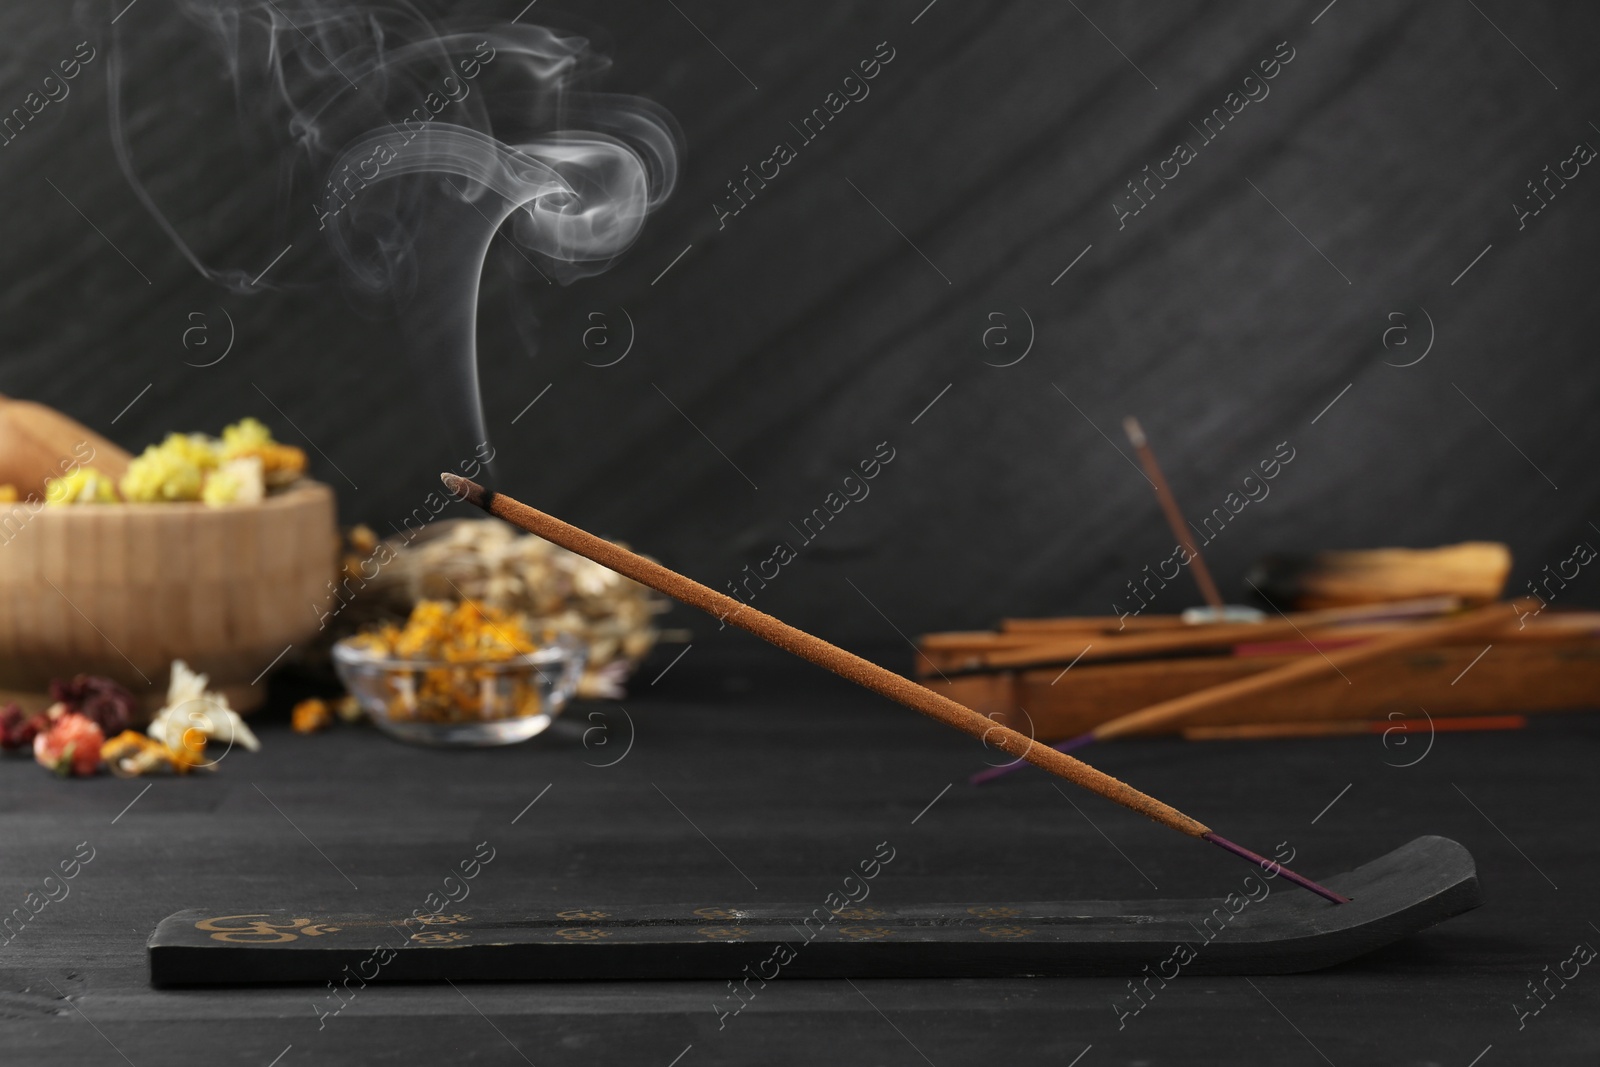 Photo of Aromatic incense stick smoldering in holder with om sign on black table